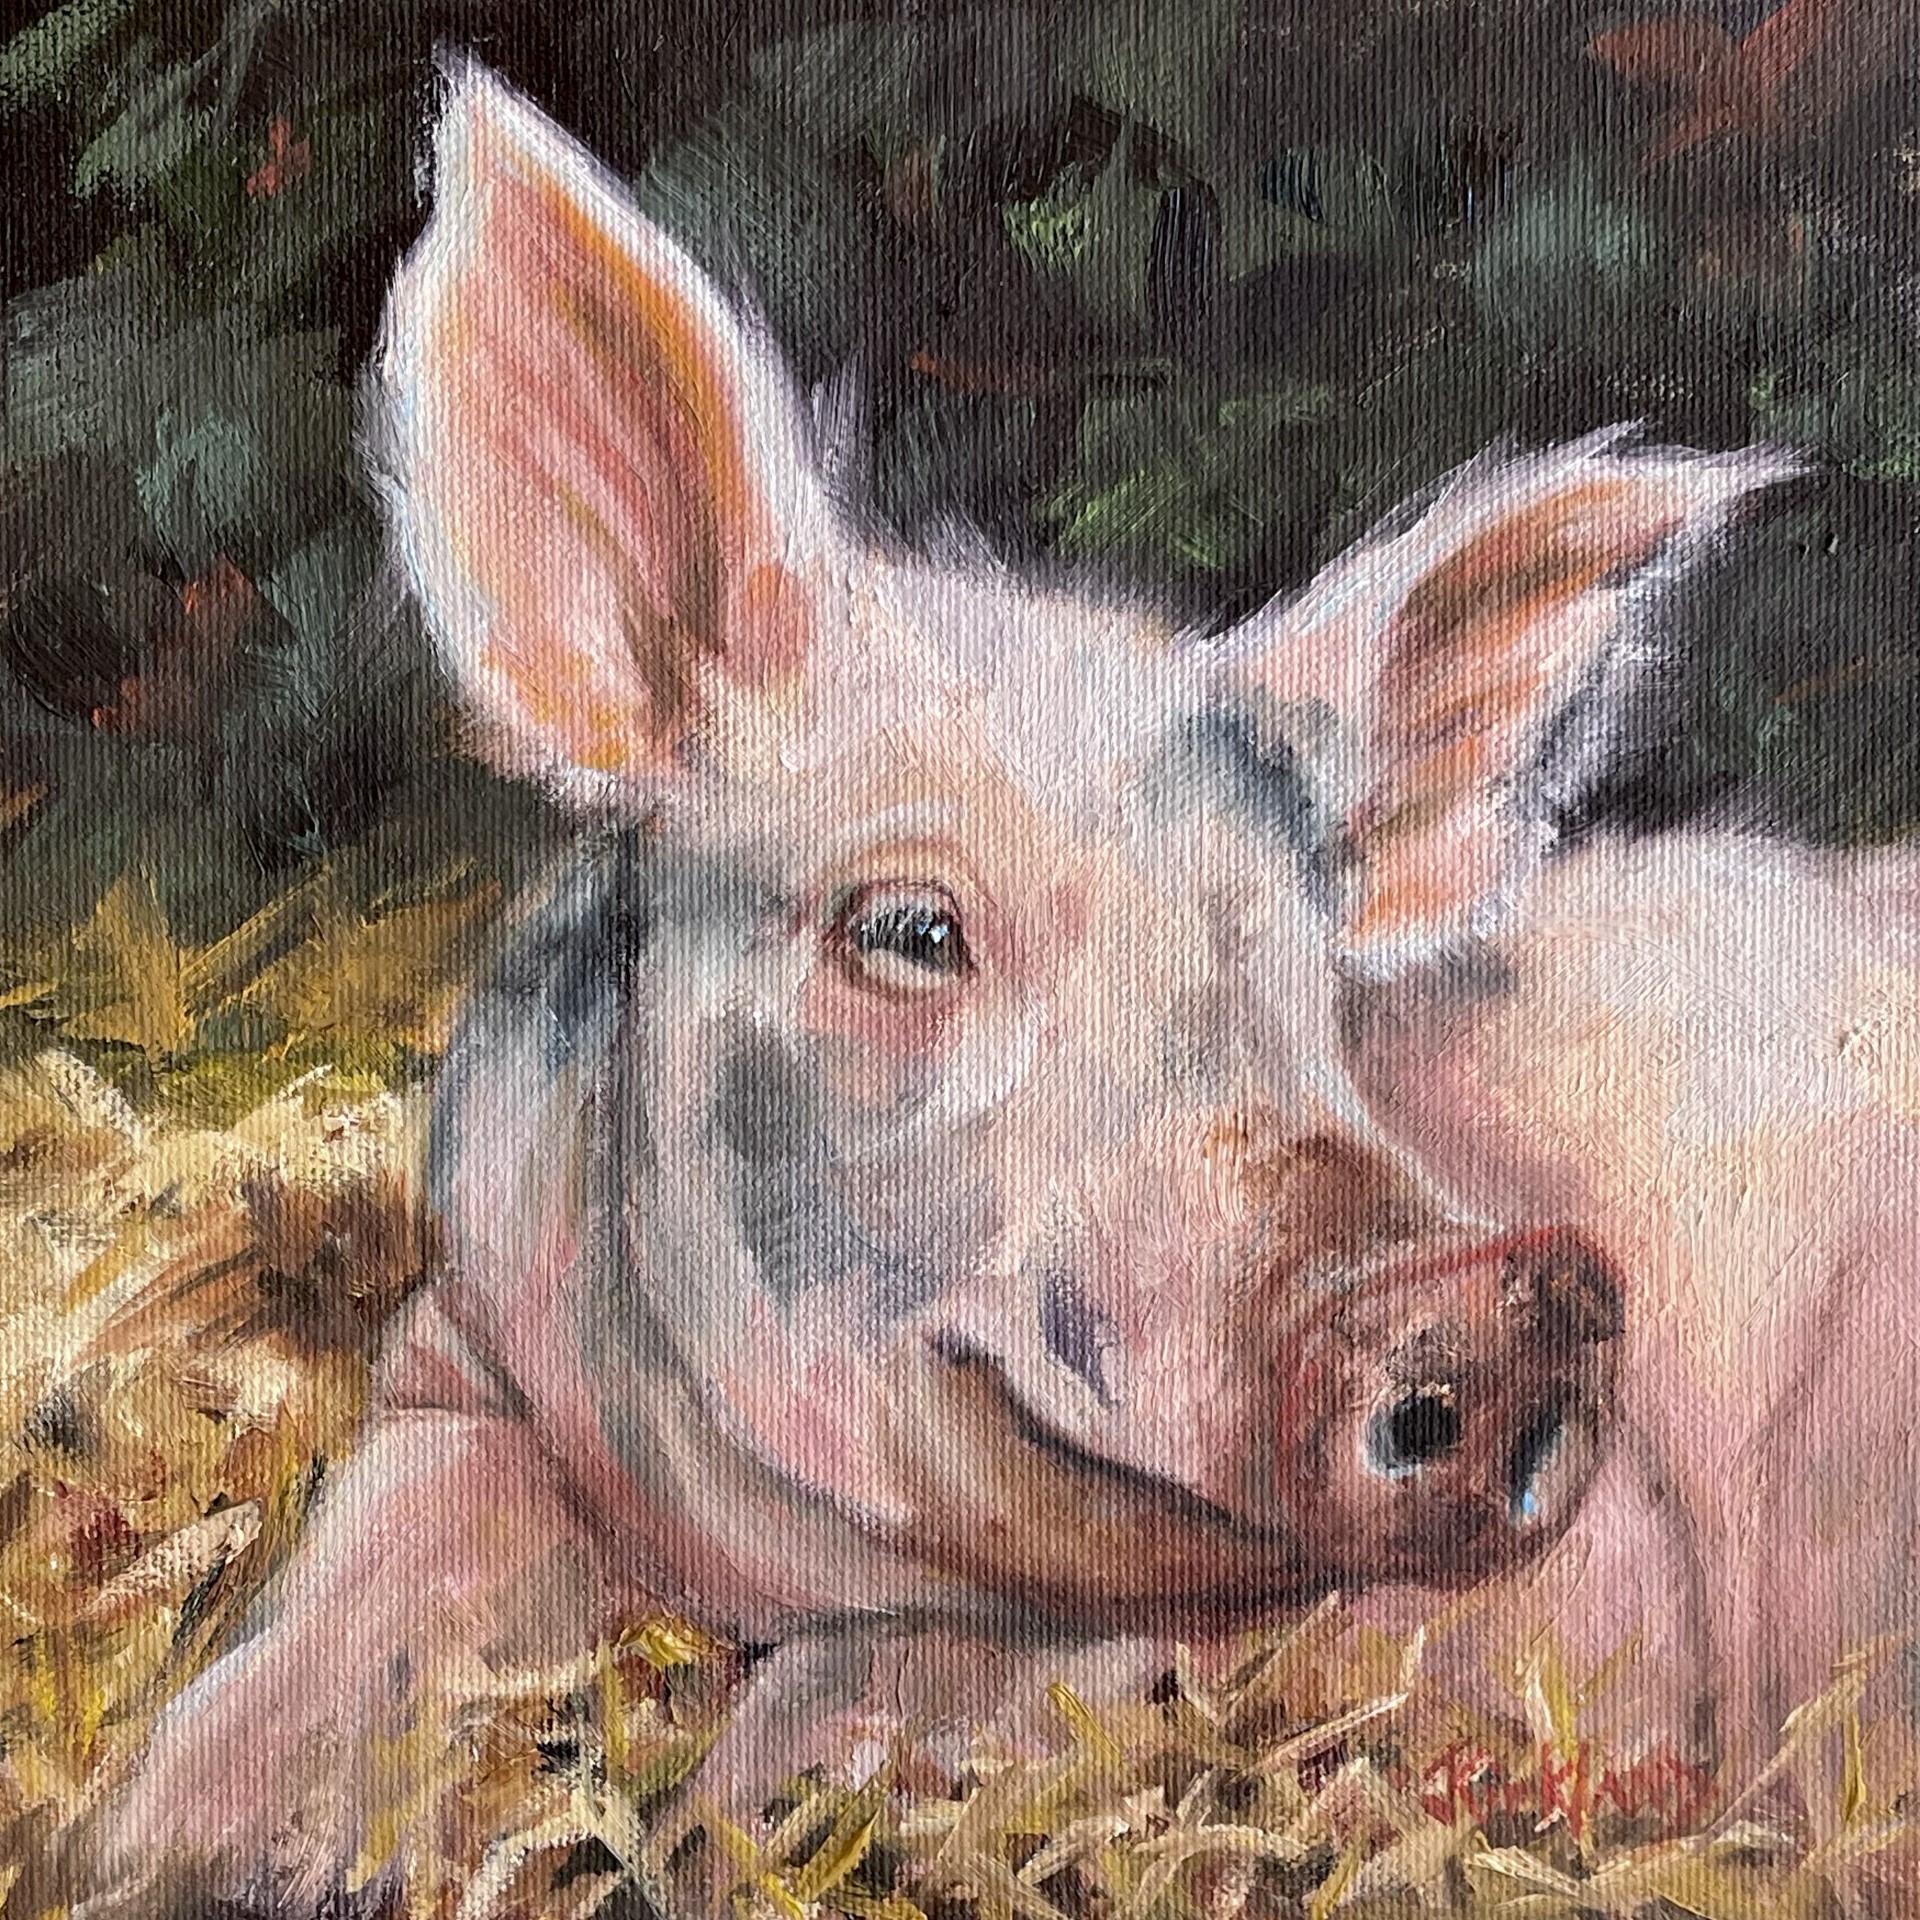 Pig-Ture Perfect 8x8 $355 at Hunter Wolff Gallery